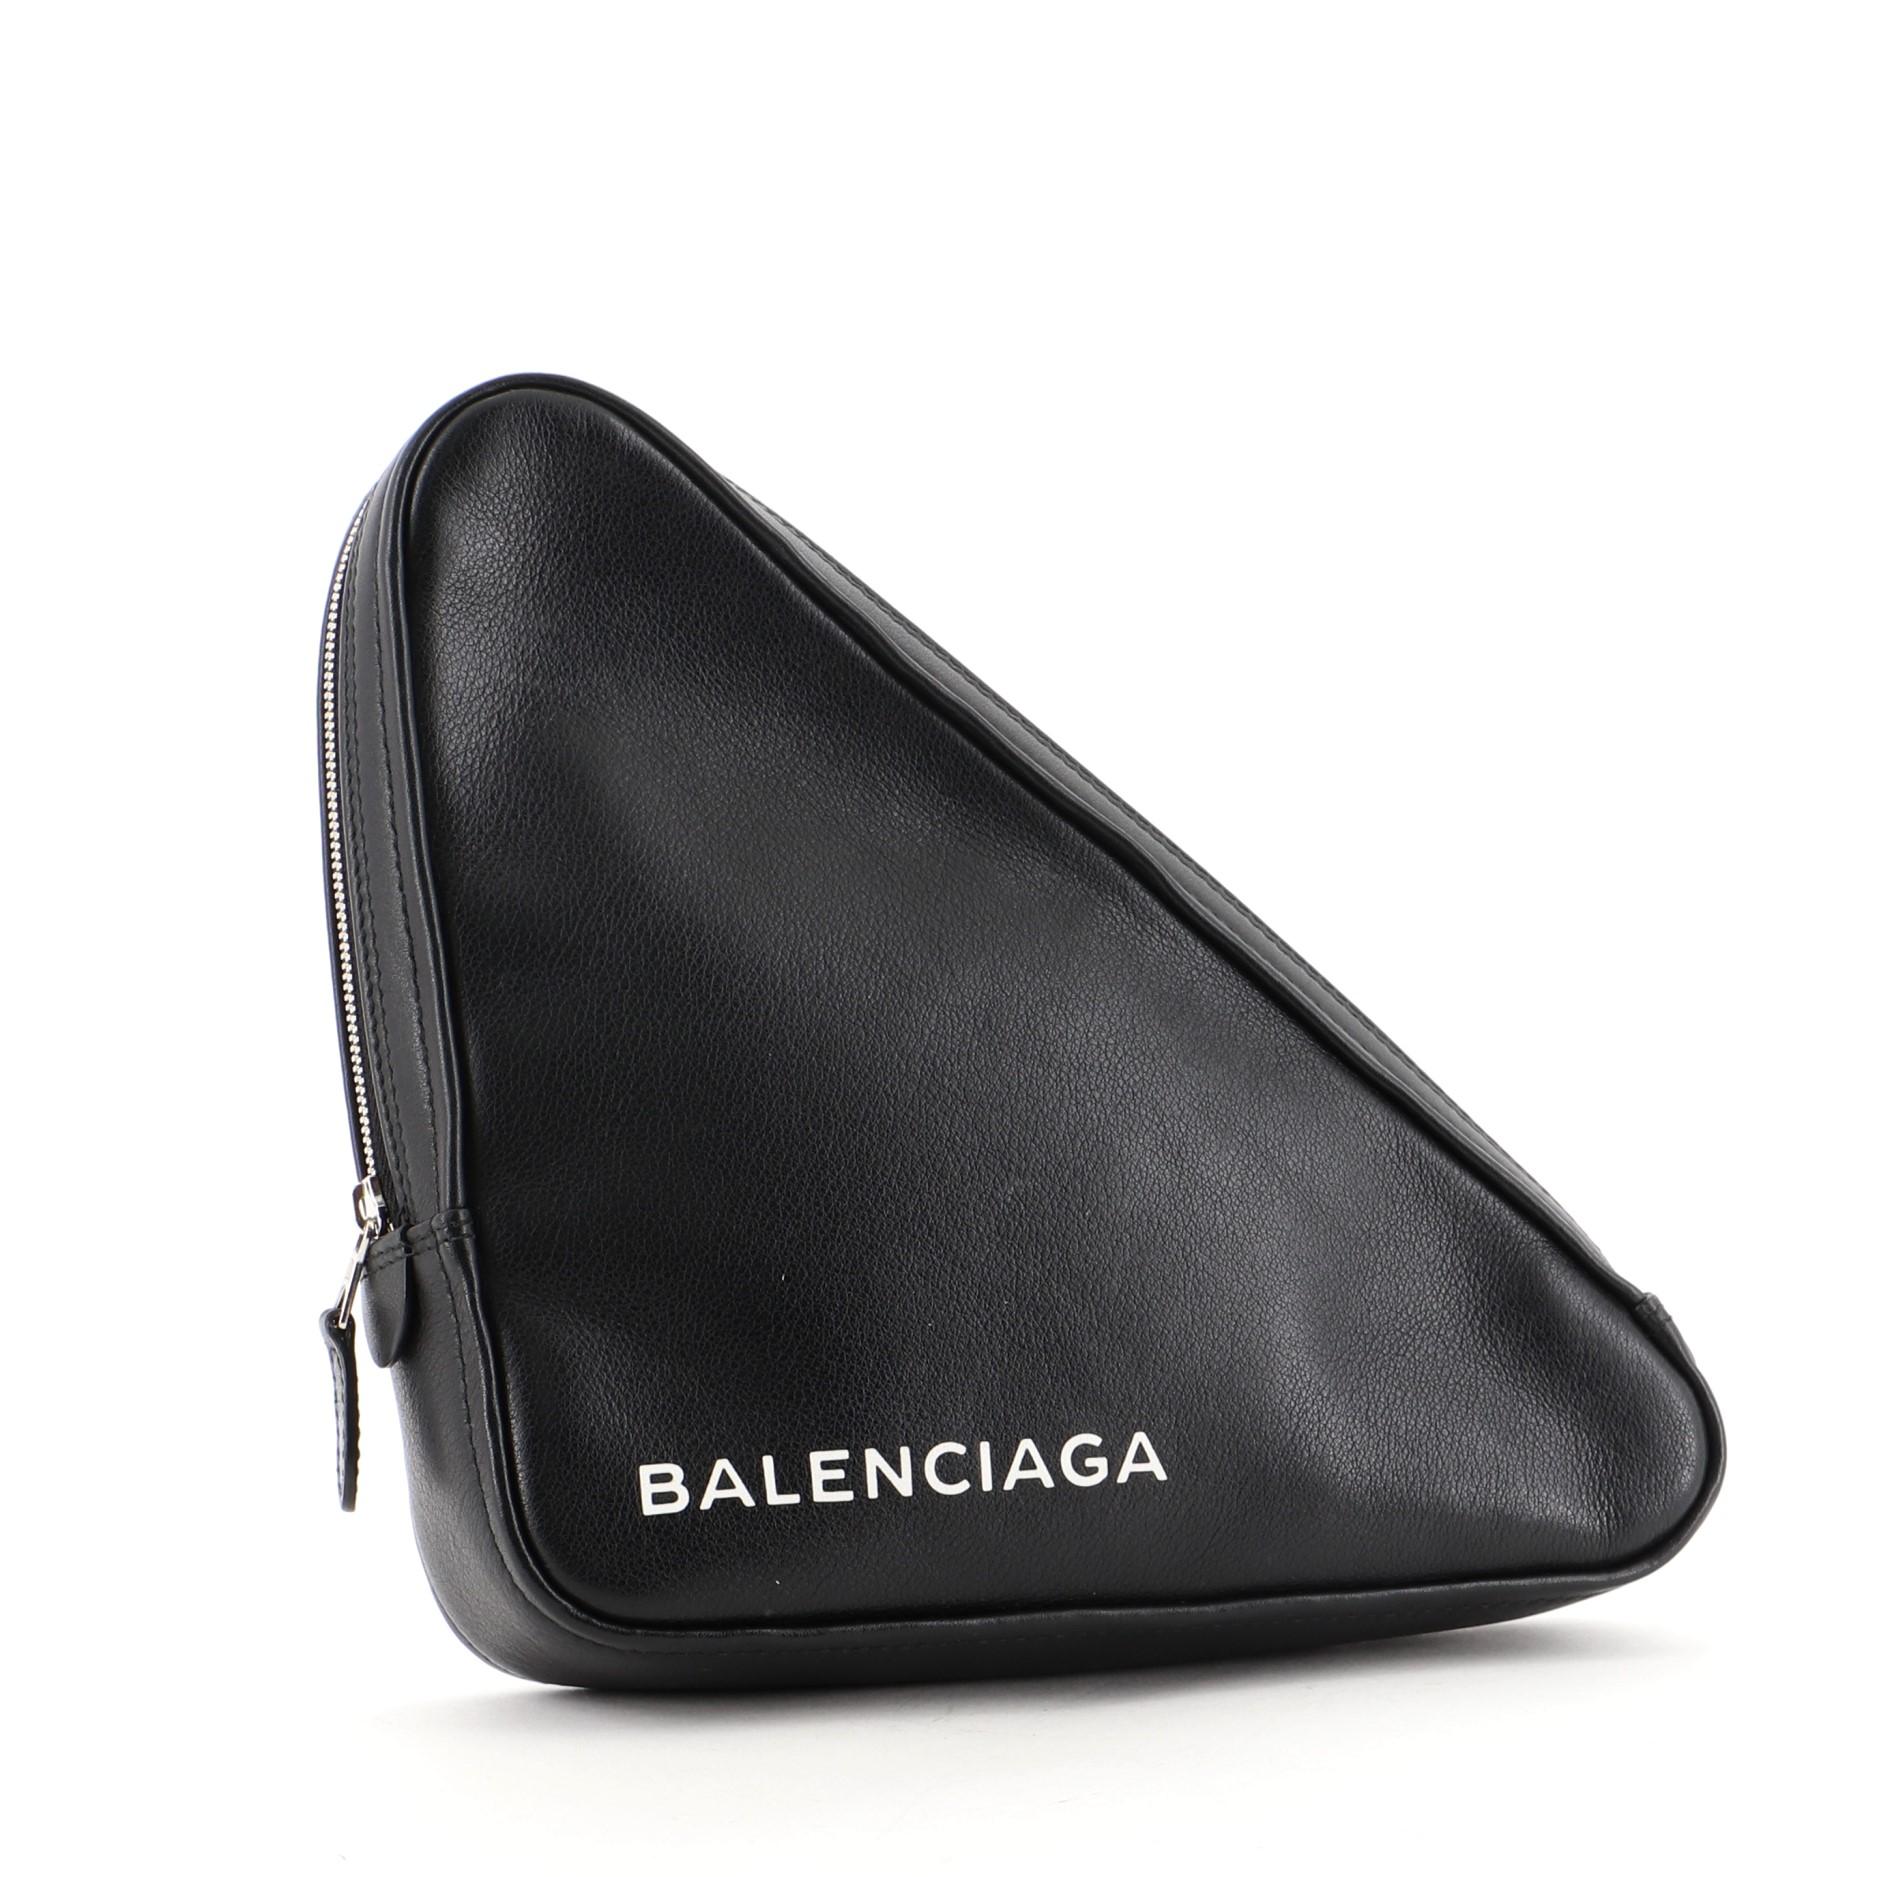 Balenciaga Triangle Pouch Leather Medium
Yellow

Condition Details: Minor wear, scuffs and creasing on exterior and in interior, scratches on hardware.

49939MSC

Height 8